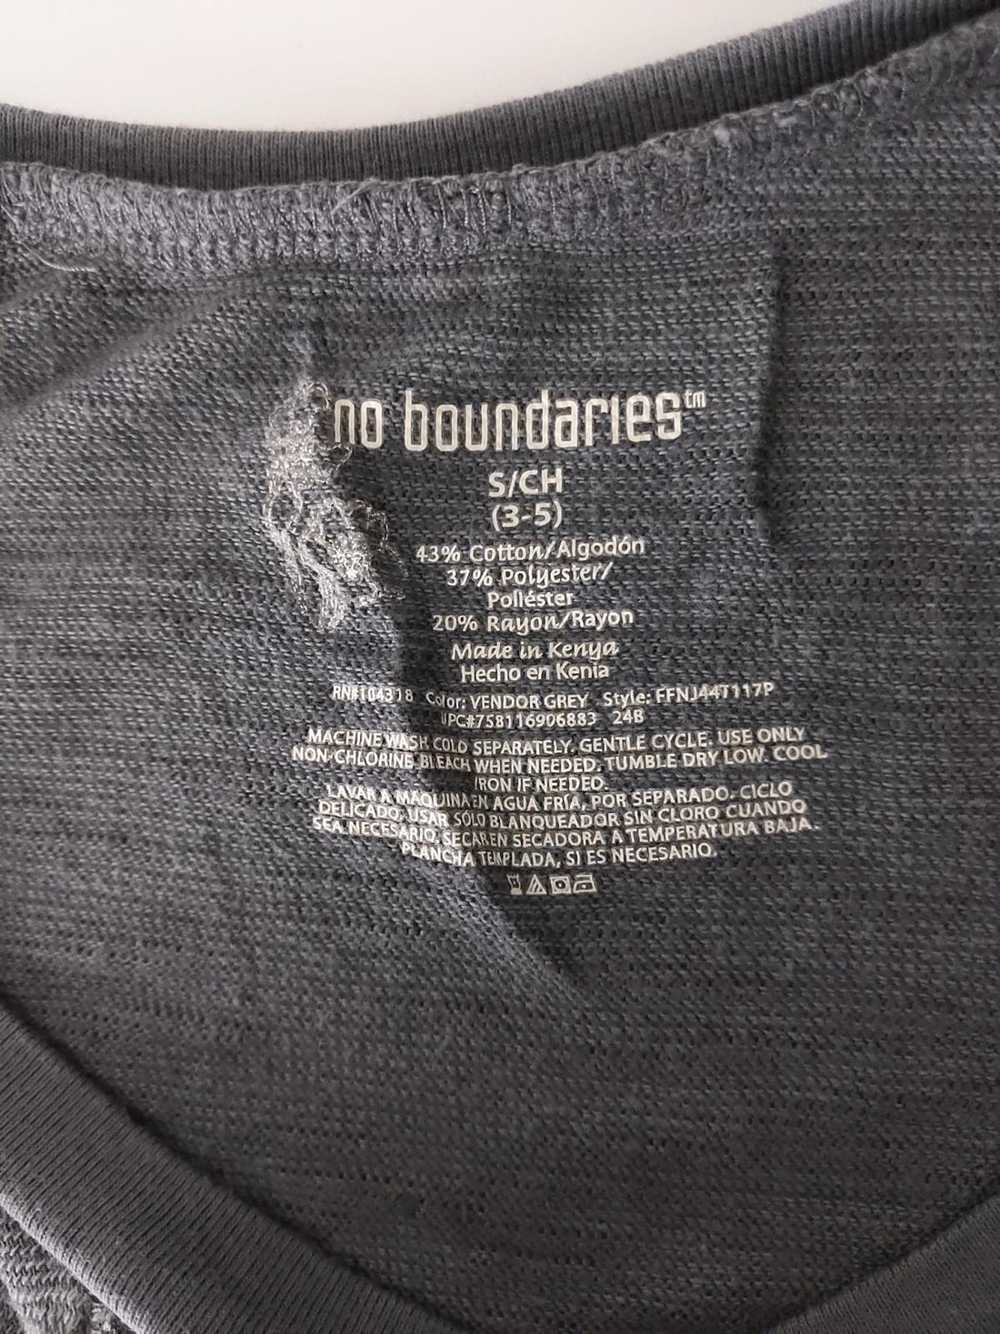 Men’s No Boundaries T-Shirt 100% Cotton. Size XS Purple brand new with tag￼￼